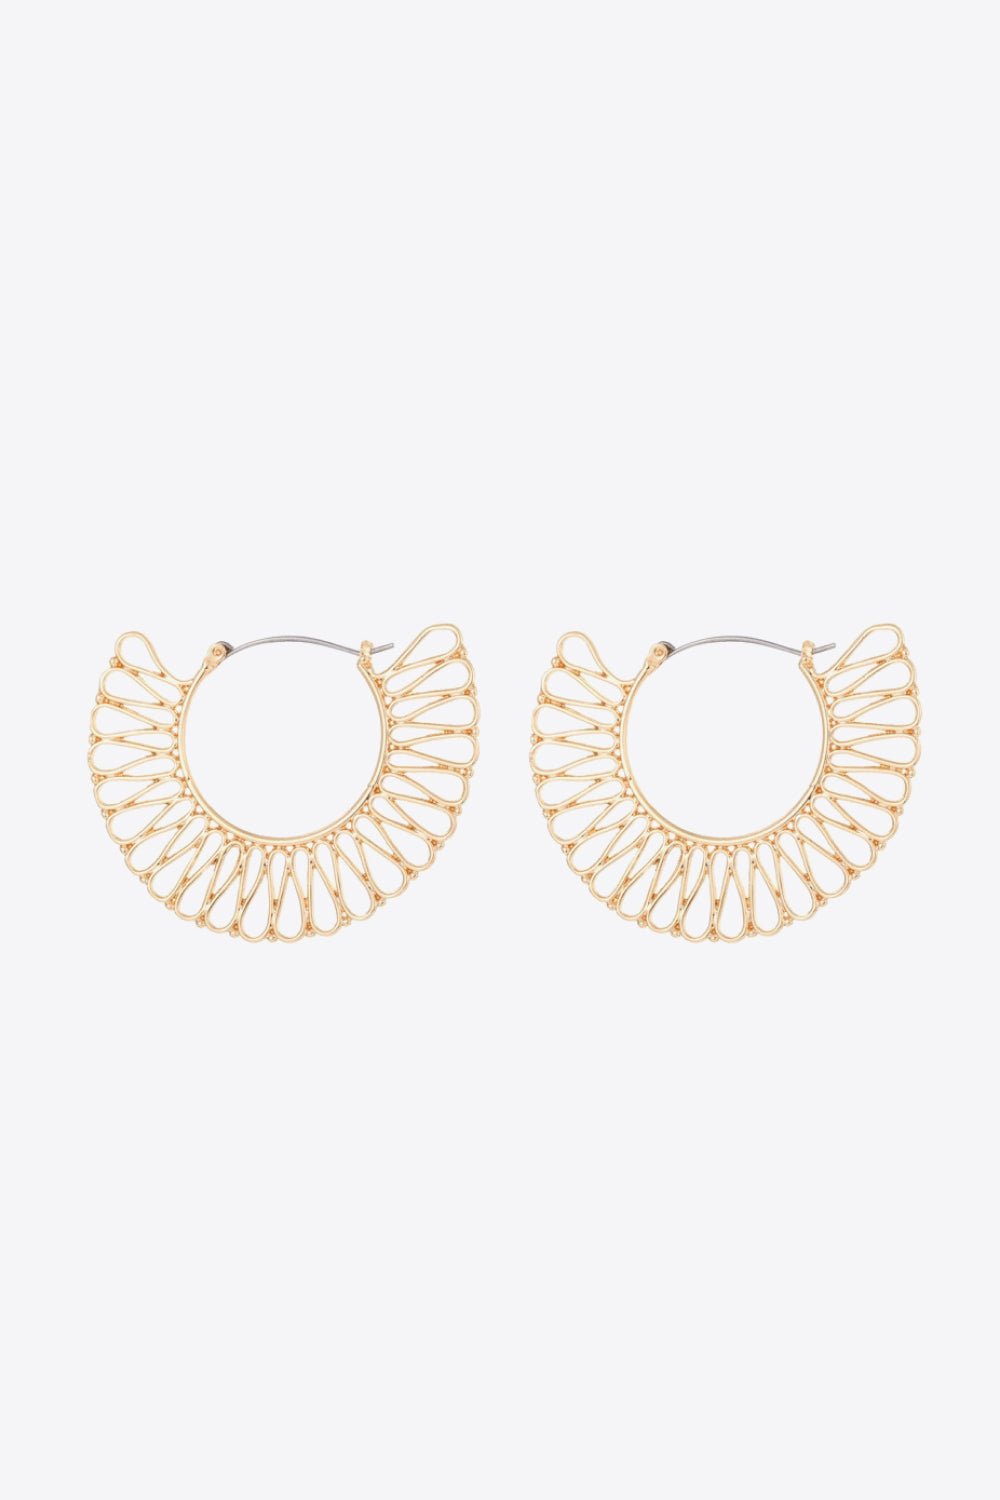 18K Gold-Plated Cutout Earrings - Uylee's Boutique